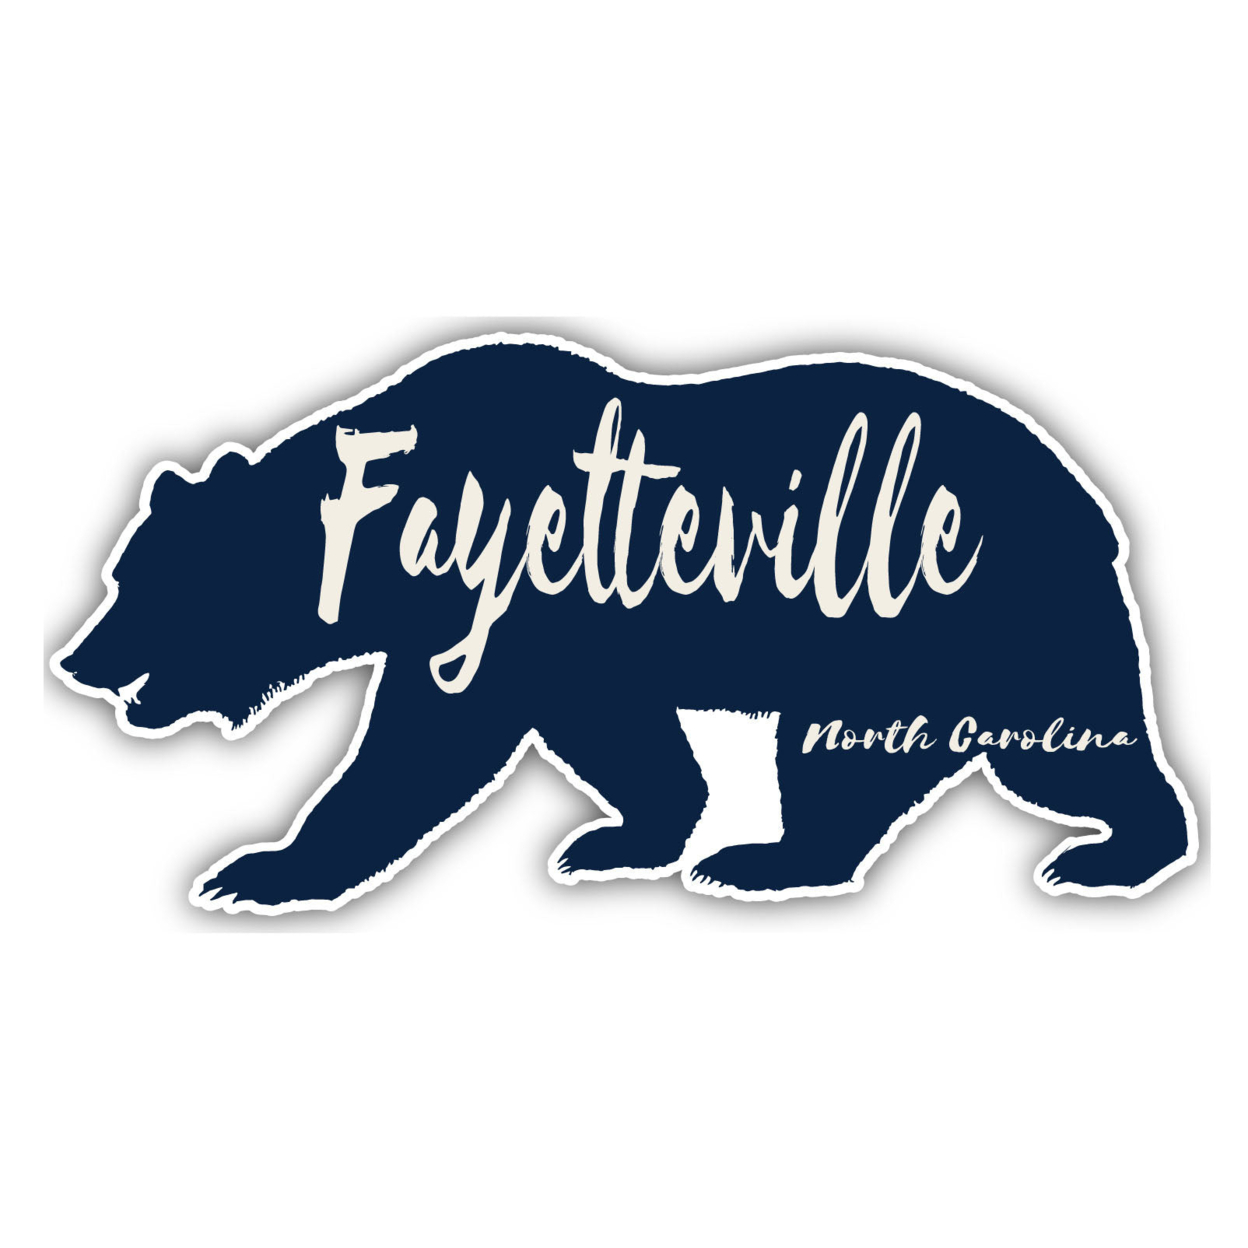 Fayetteville North Carolina Souvenir Decorative Stickers (Choose Theme And Size) - 4-Pack, 2-Inch, Bear